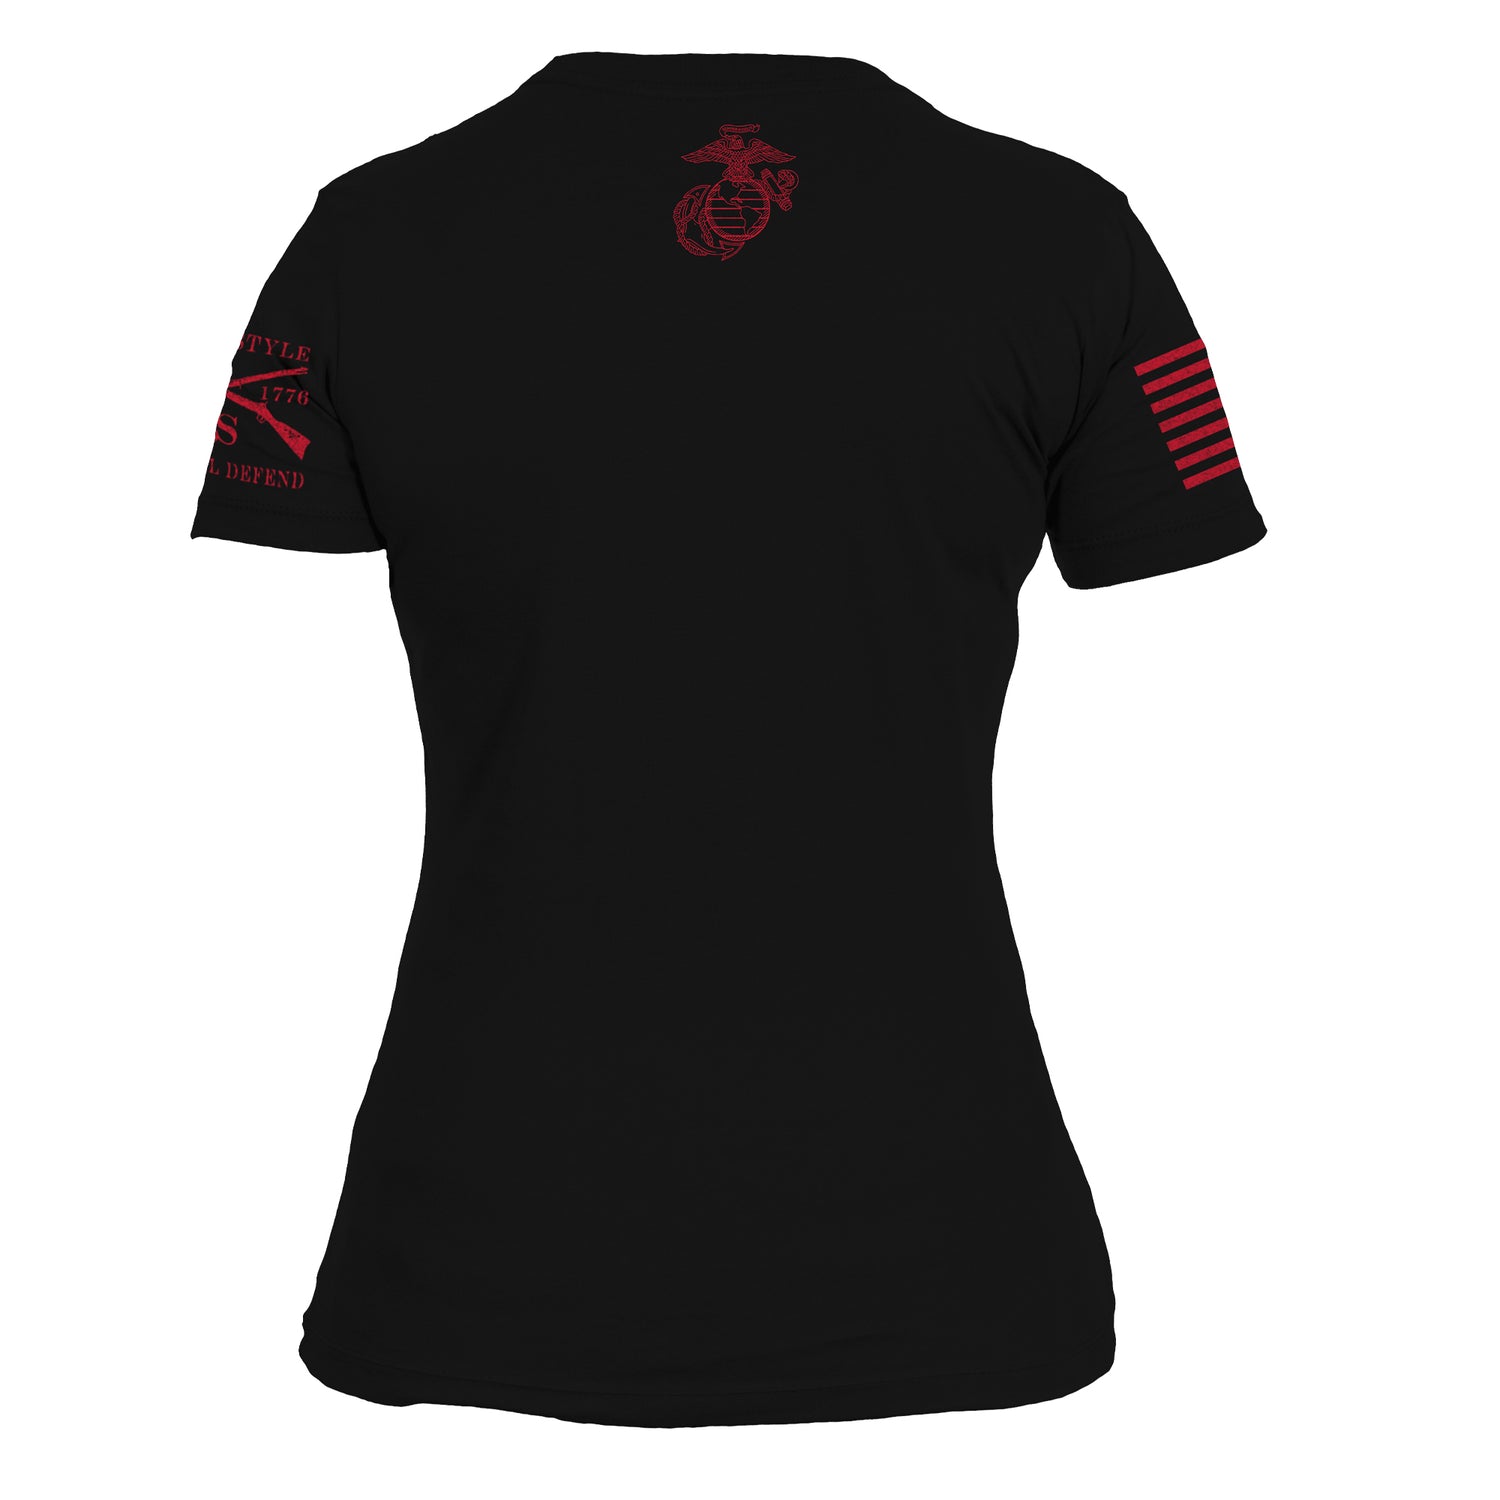 USMC - Est. 1775 Slim-Fit Tee for Women Black and Red | Grunt Style 